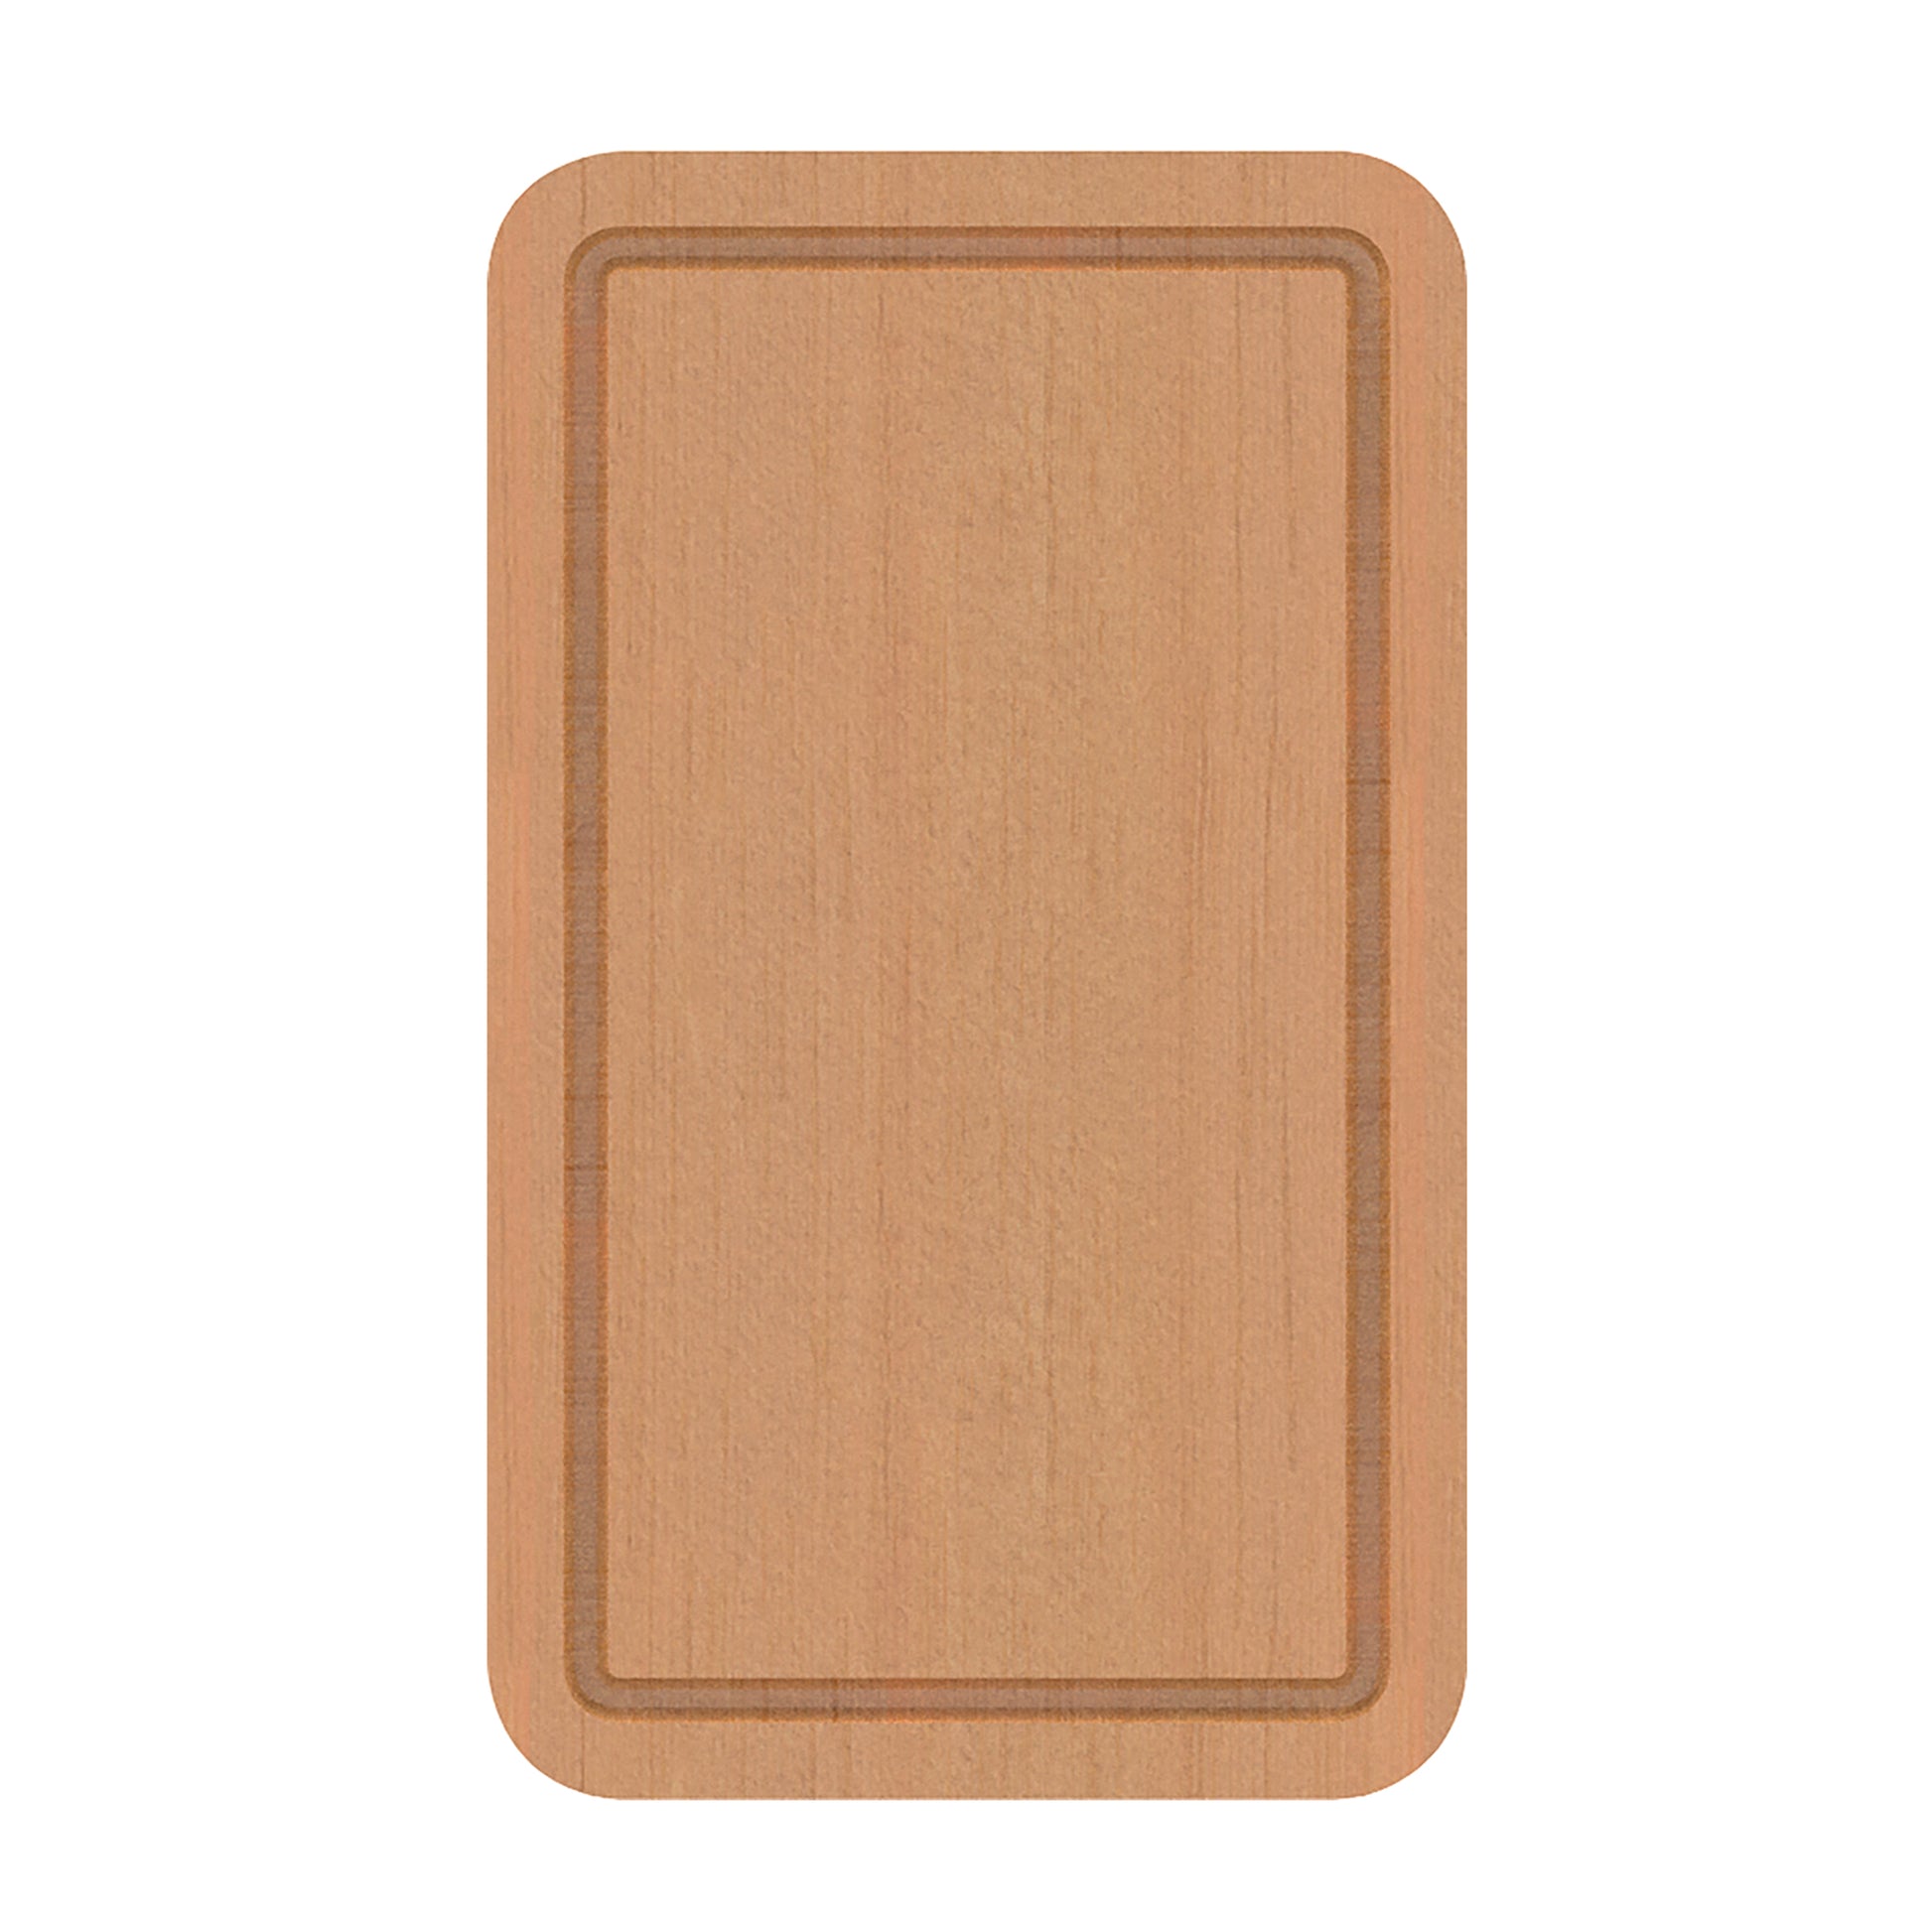 FRANKE PT-41S 11.0-in. x 18.5-in. Solid Wood Cutting Board for Pescara Series Sinks